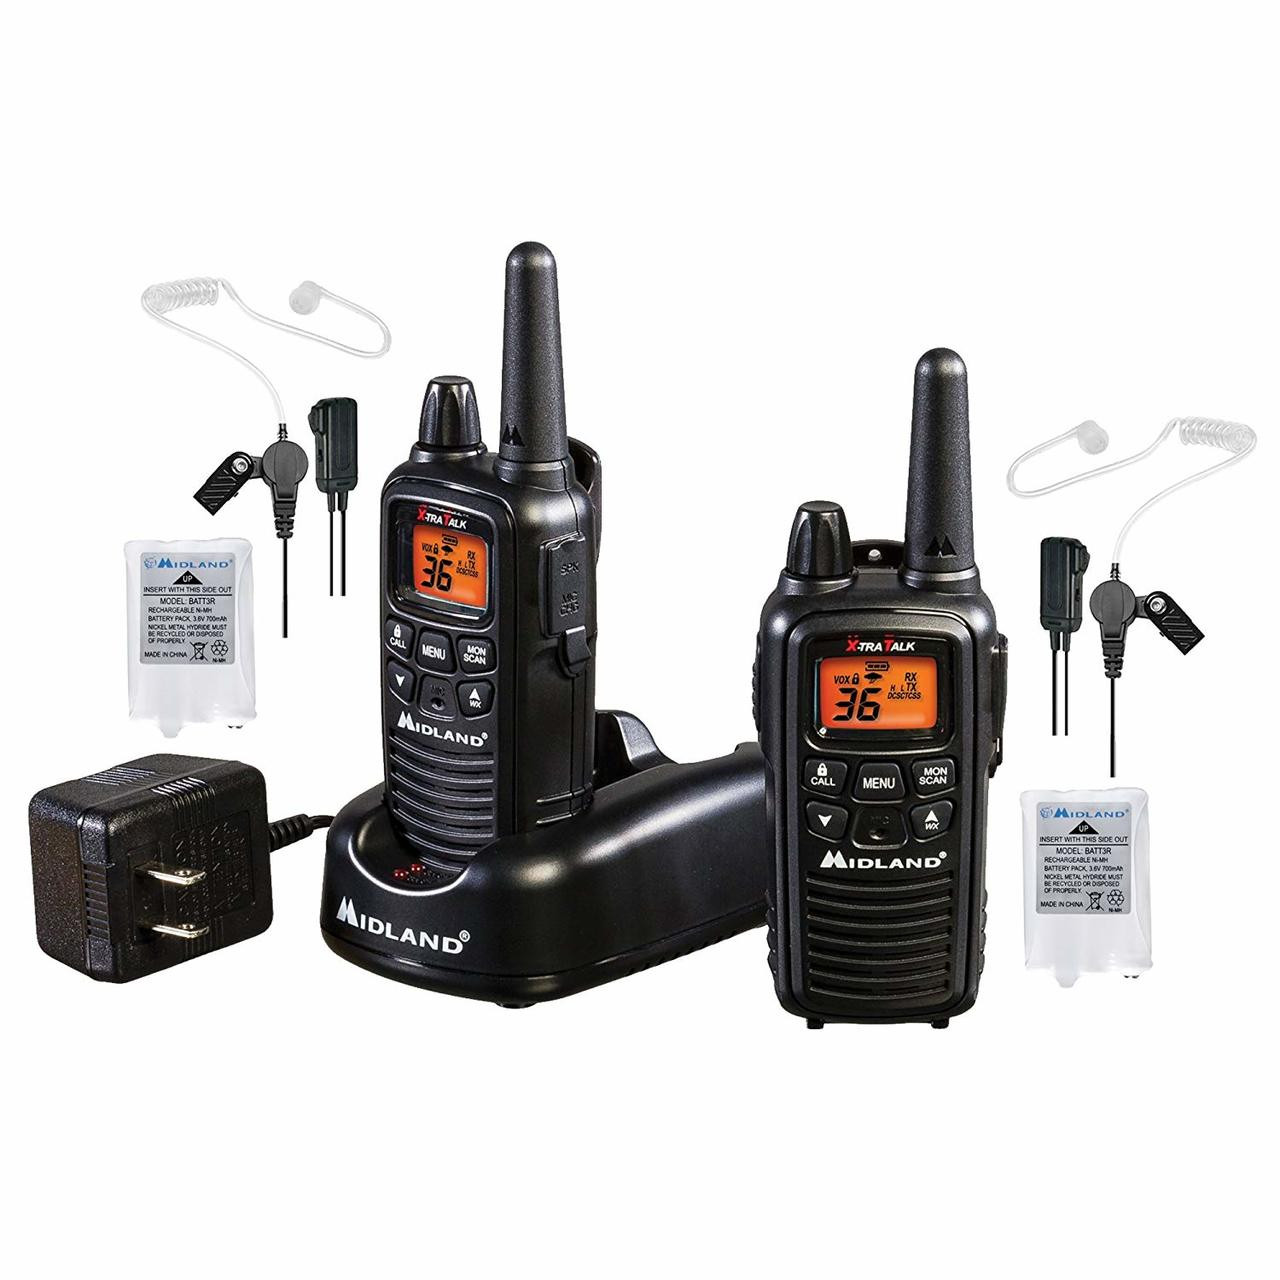 Midland LXT600BB FRS Business Two Way Radio Bundle with Charger and Headsets.   3 Year warranty on the Midland LXT600BB.